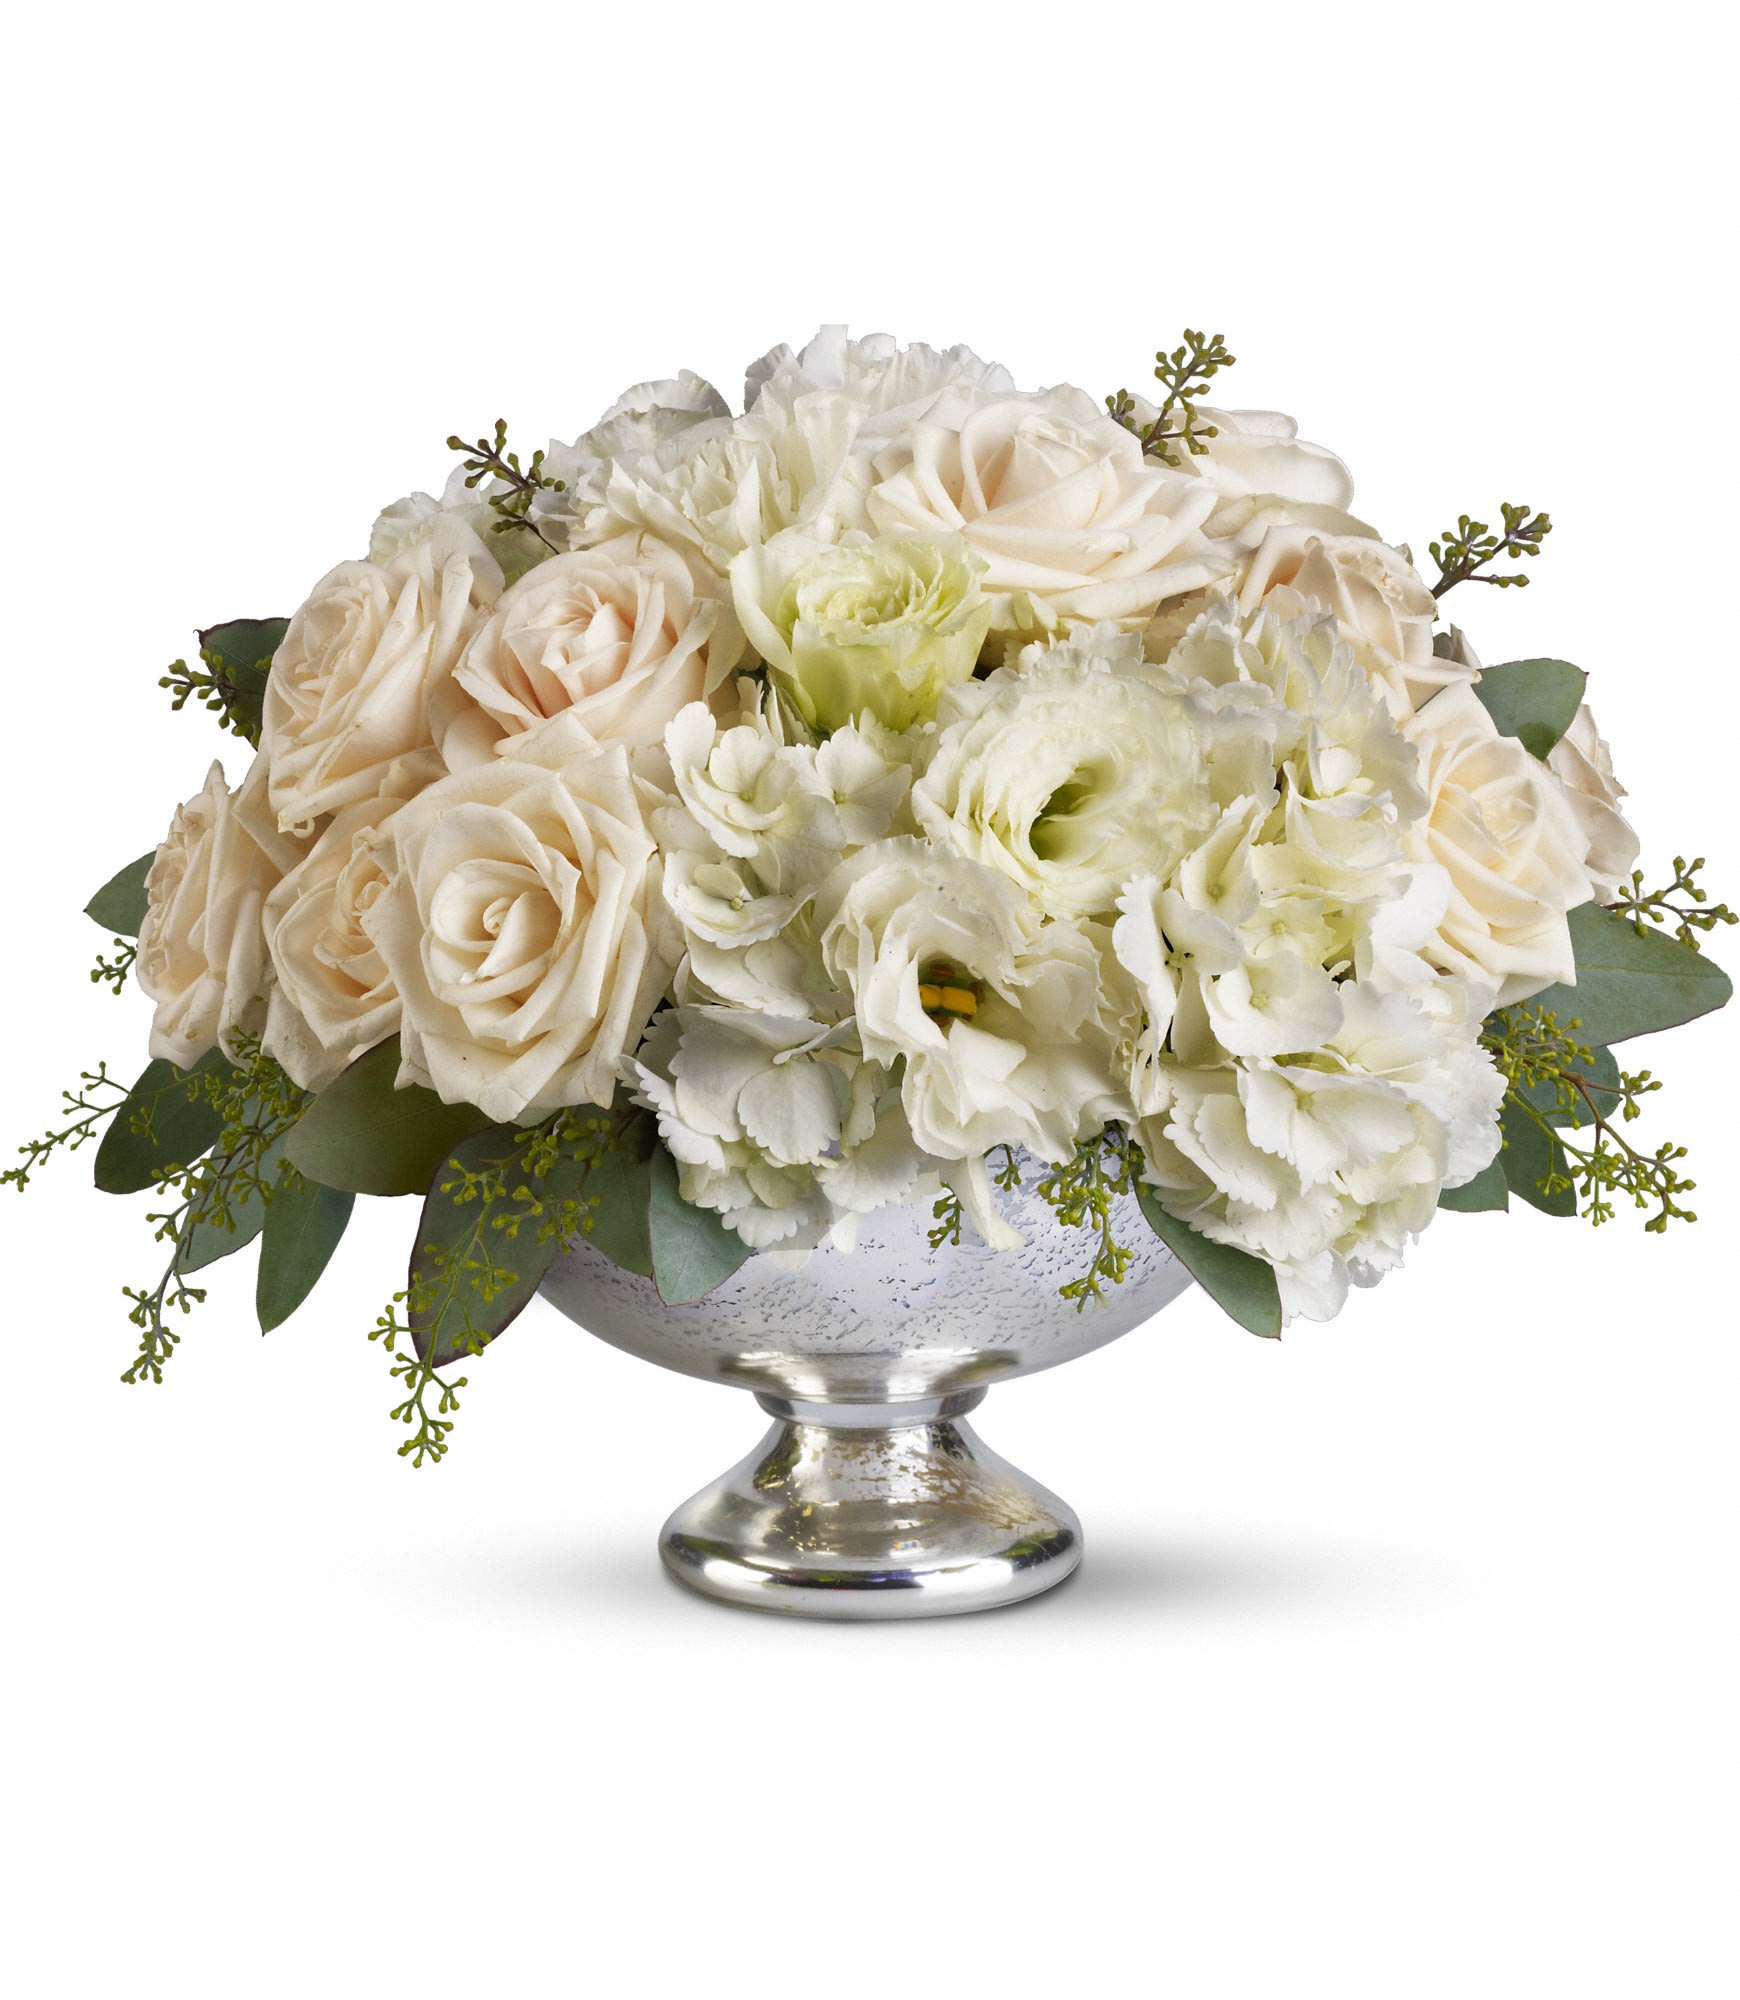 Park Avenue Centerpiece - T188-1A - Treat your guests to Park Avenue elegance with this dazzling arrangement of crÃ¨me roses, white hydrangea and white lisianthus presented in a brilliant Mercury Glass Bowl. It's a lovely choice for any special occasion, from weddings to anniversaries.  A beautiful Mercury Glass Bowl presents a soft mix of crÃ¨me roses, white hydrangea and white lisianthus accented with seeded eucalyptus.  Approximately 13 1/2&quot; W x 10 1/4&quot; H  Orientation: All-Around      As Shown : T188-1A  